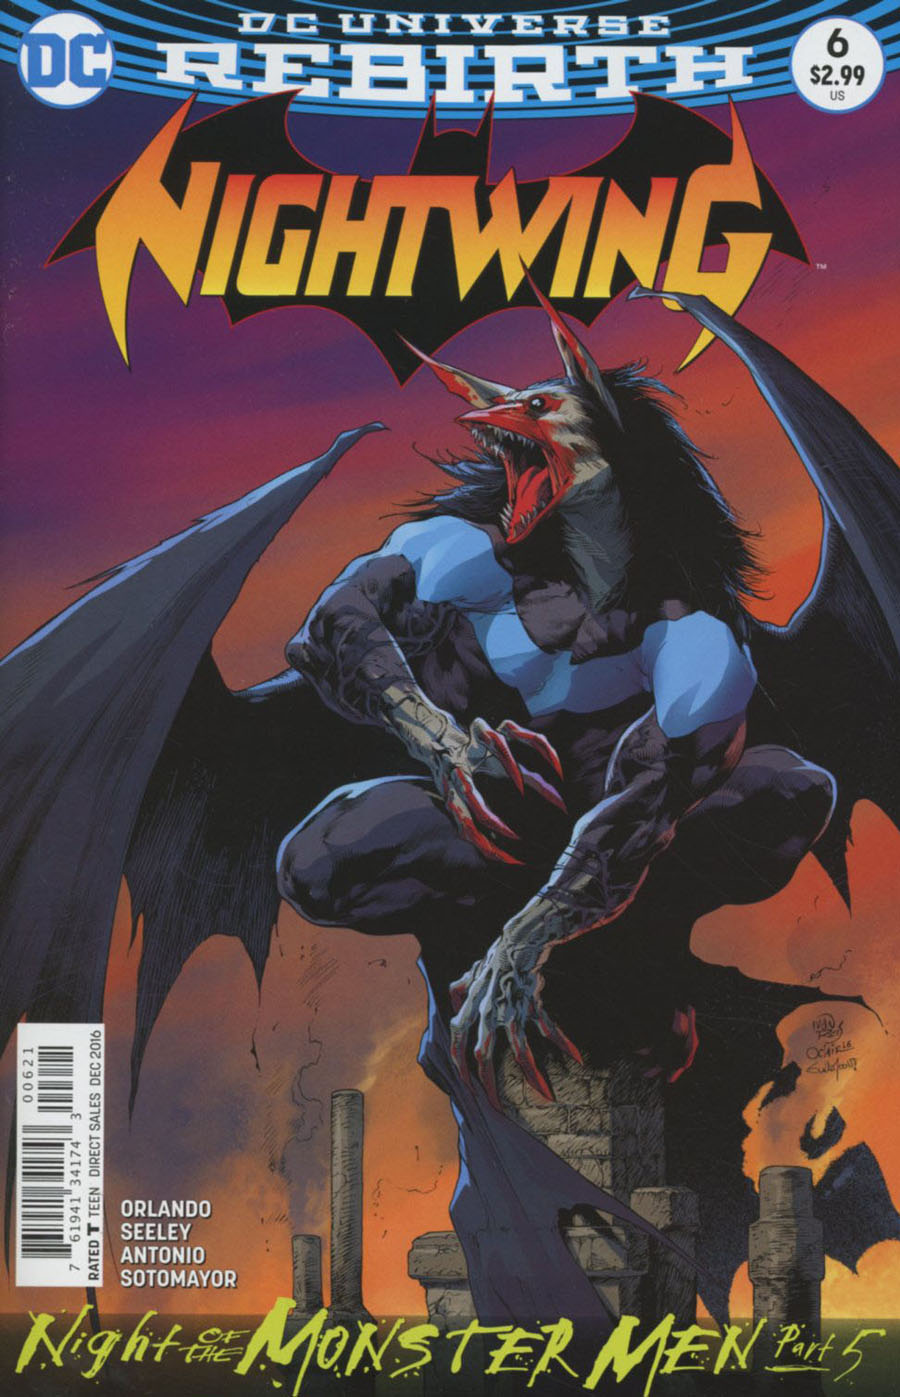 Nightwing Vol 4 #6 Cover B Variant Ivan Reis Cover (Night Of The Monster Men Part 5)